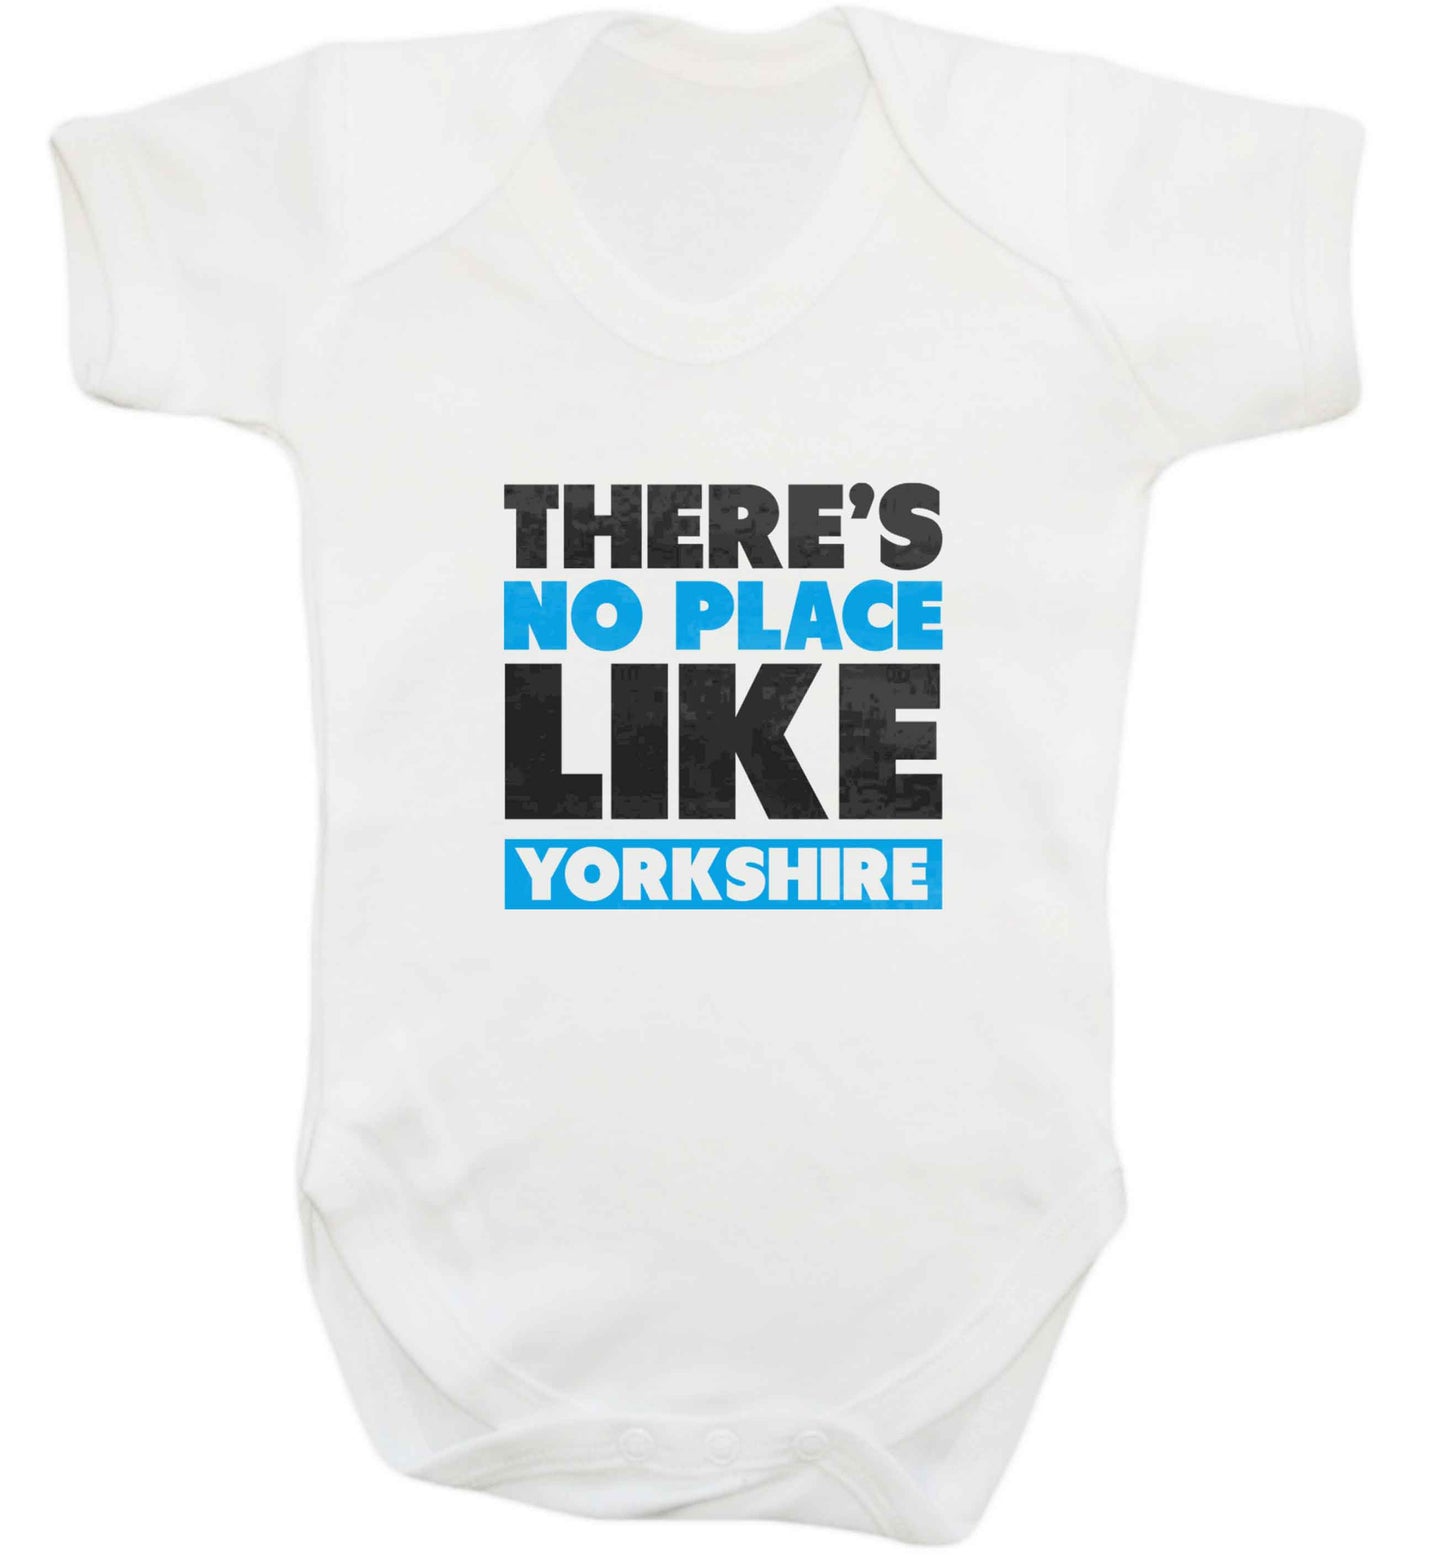 There's no place like Yorkshire baby vest white 18-24 months